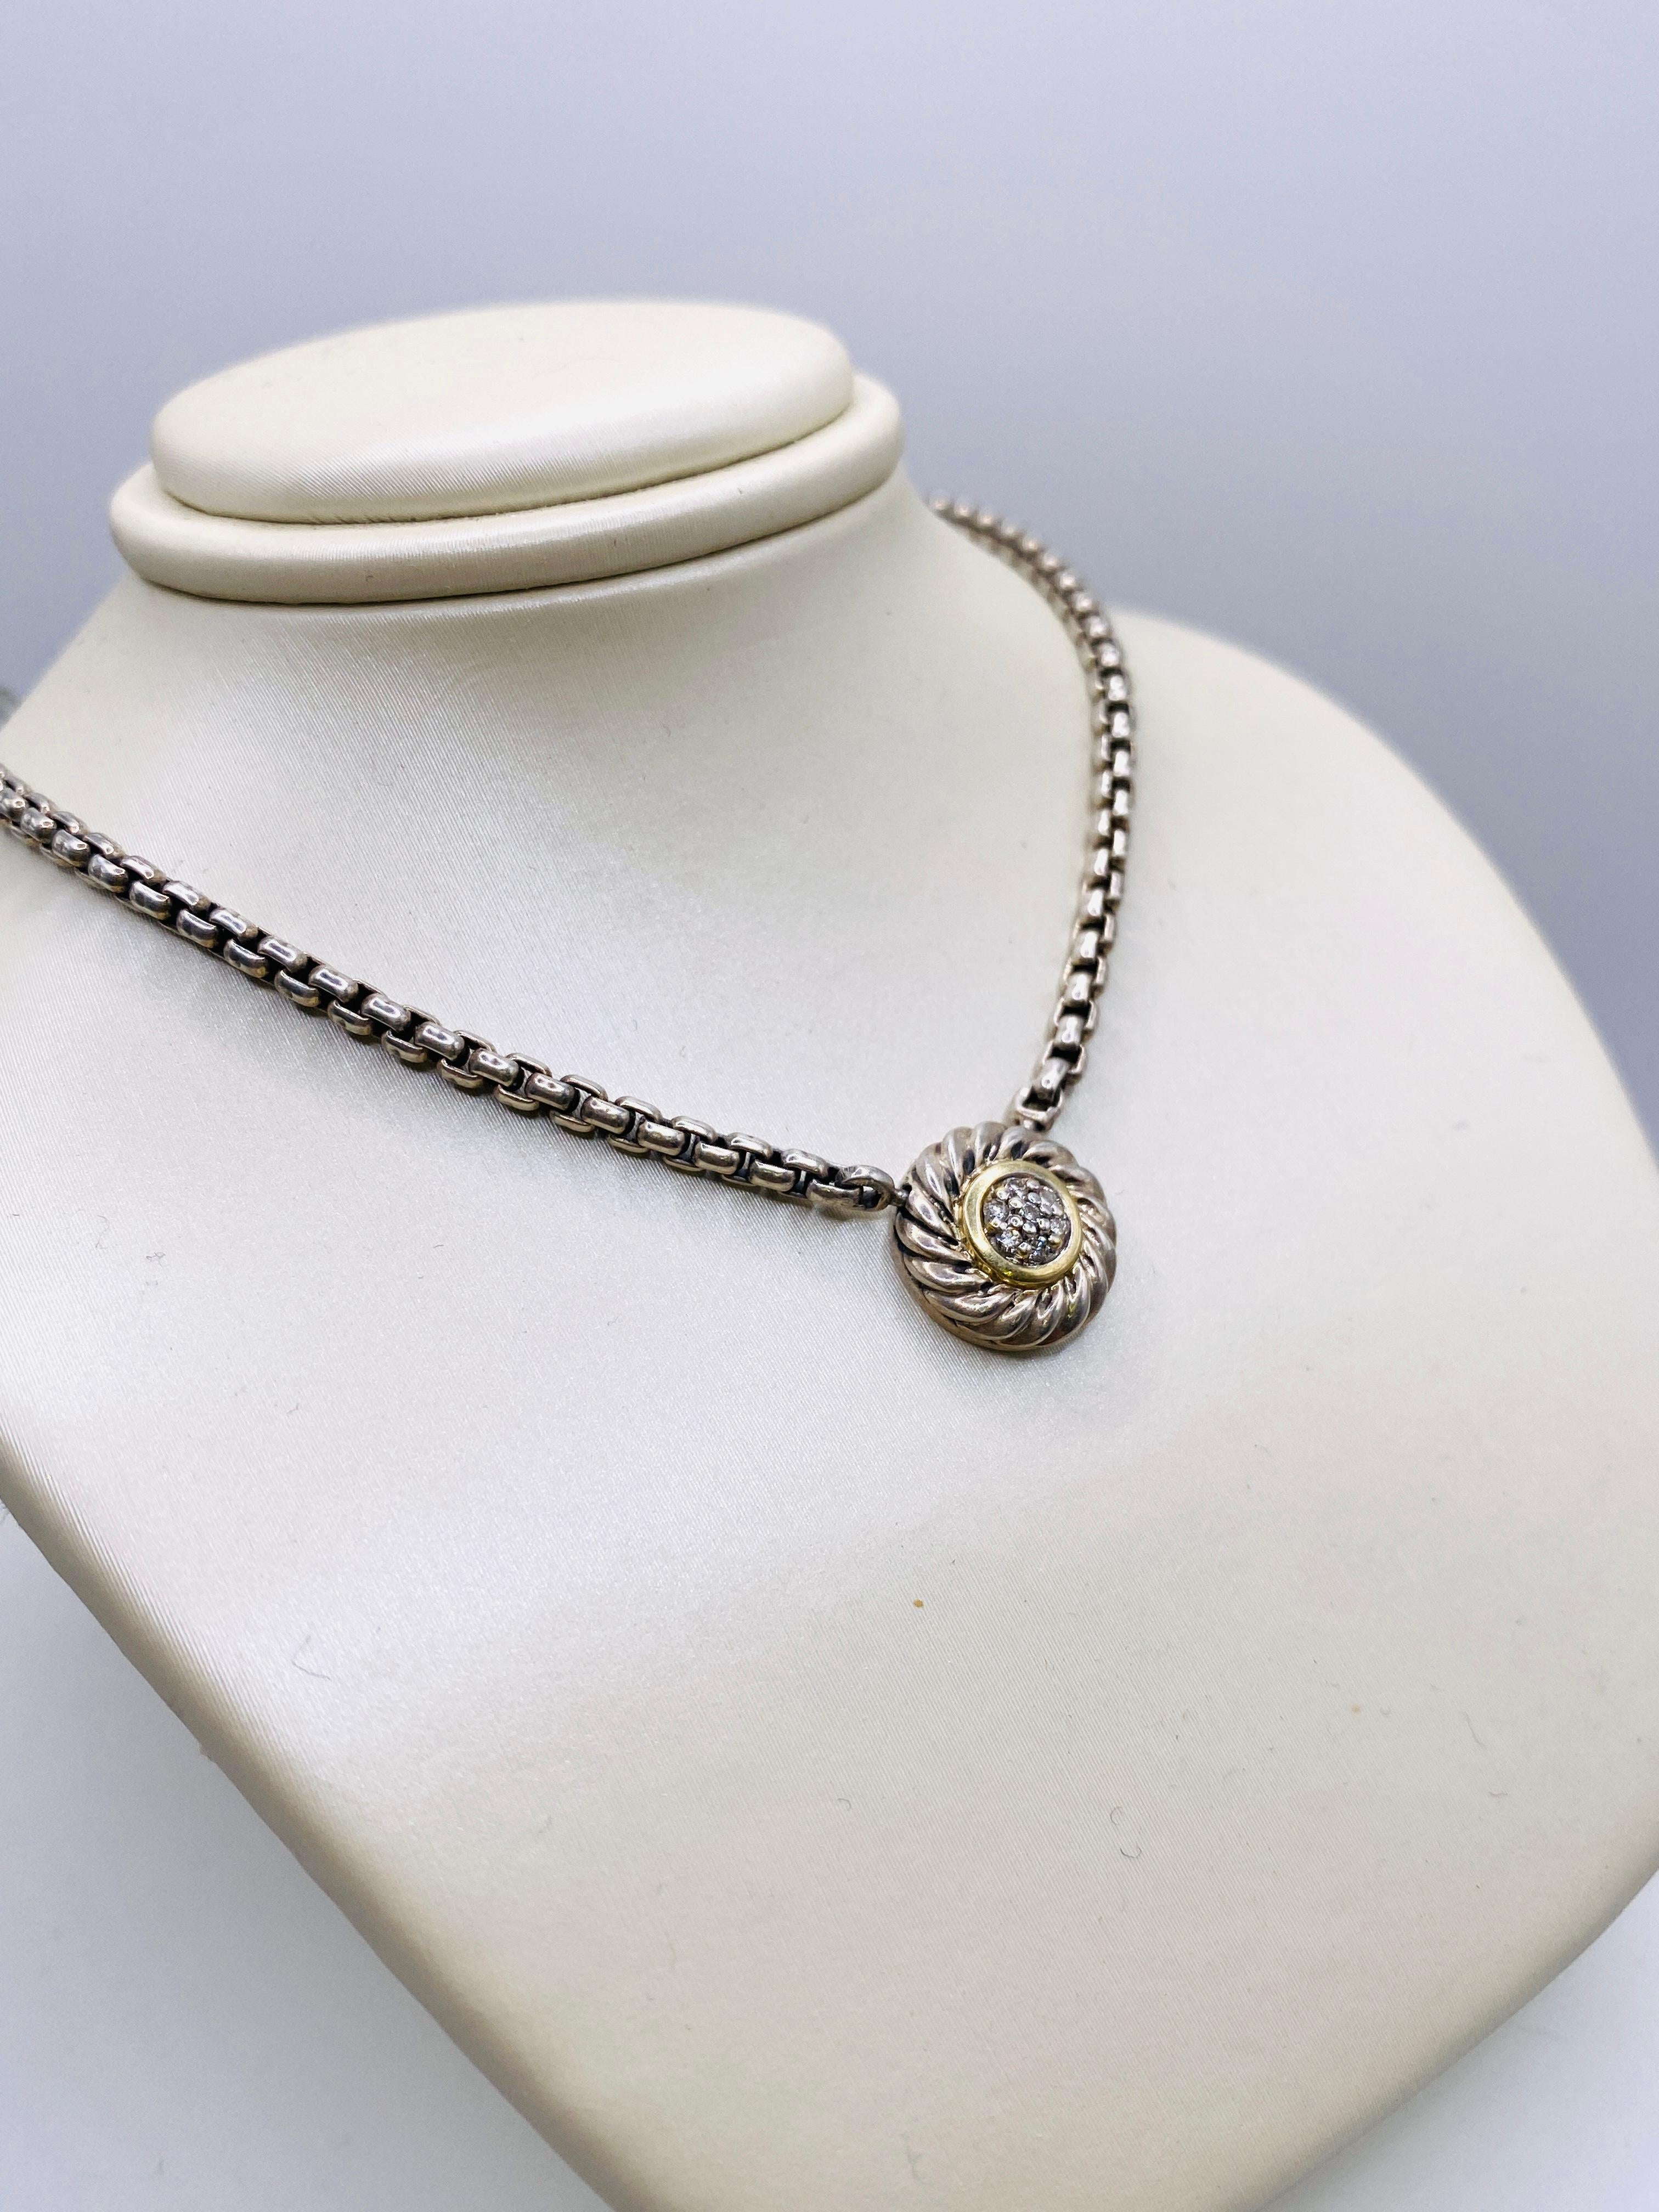 David Yurman cookie sterling silver and 18k yellow gold 7-0.05 carat total weight pave set diamond pendant with 16